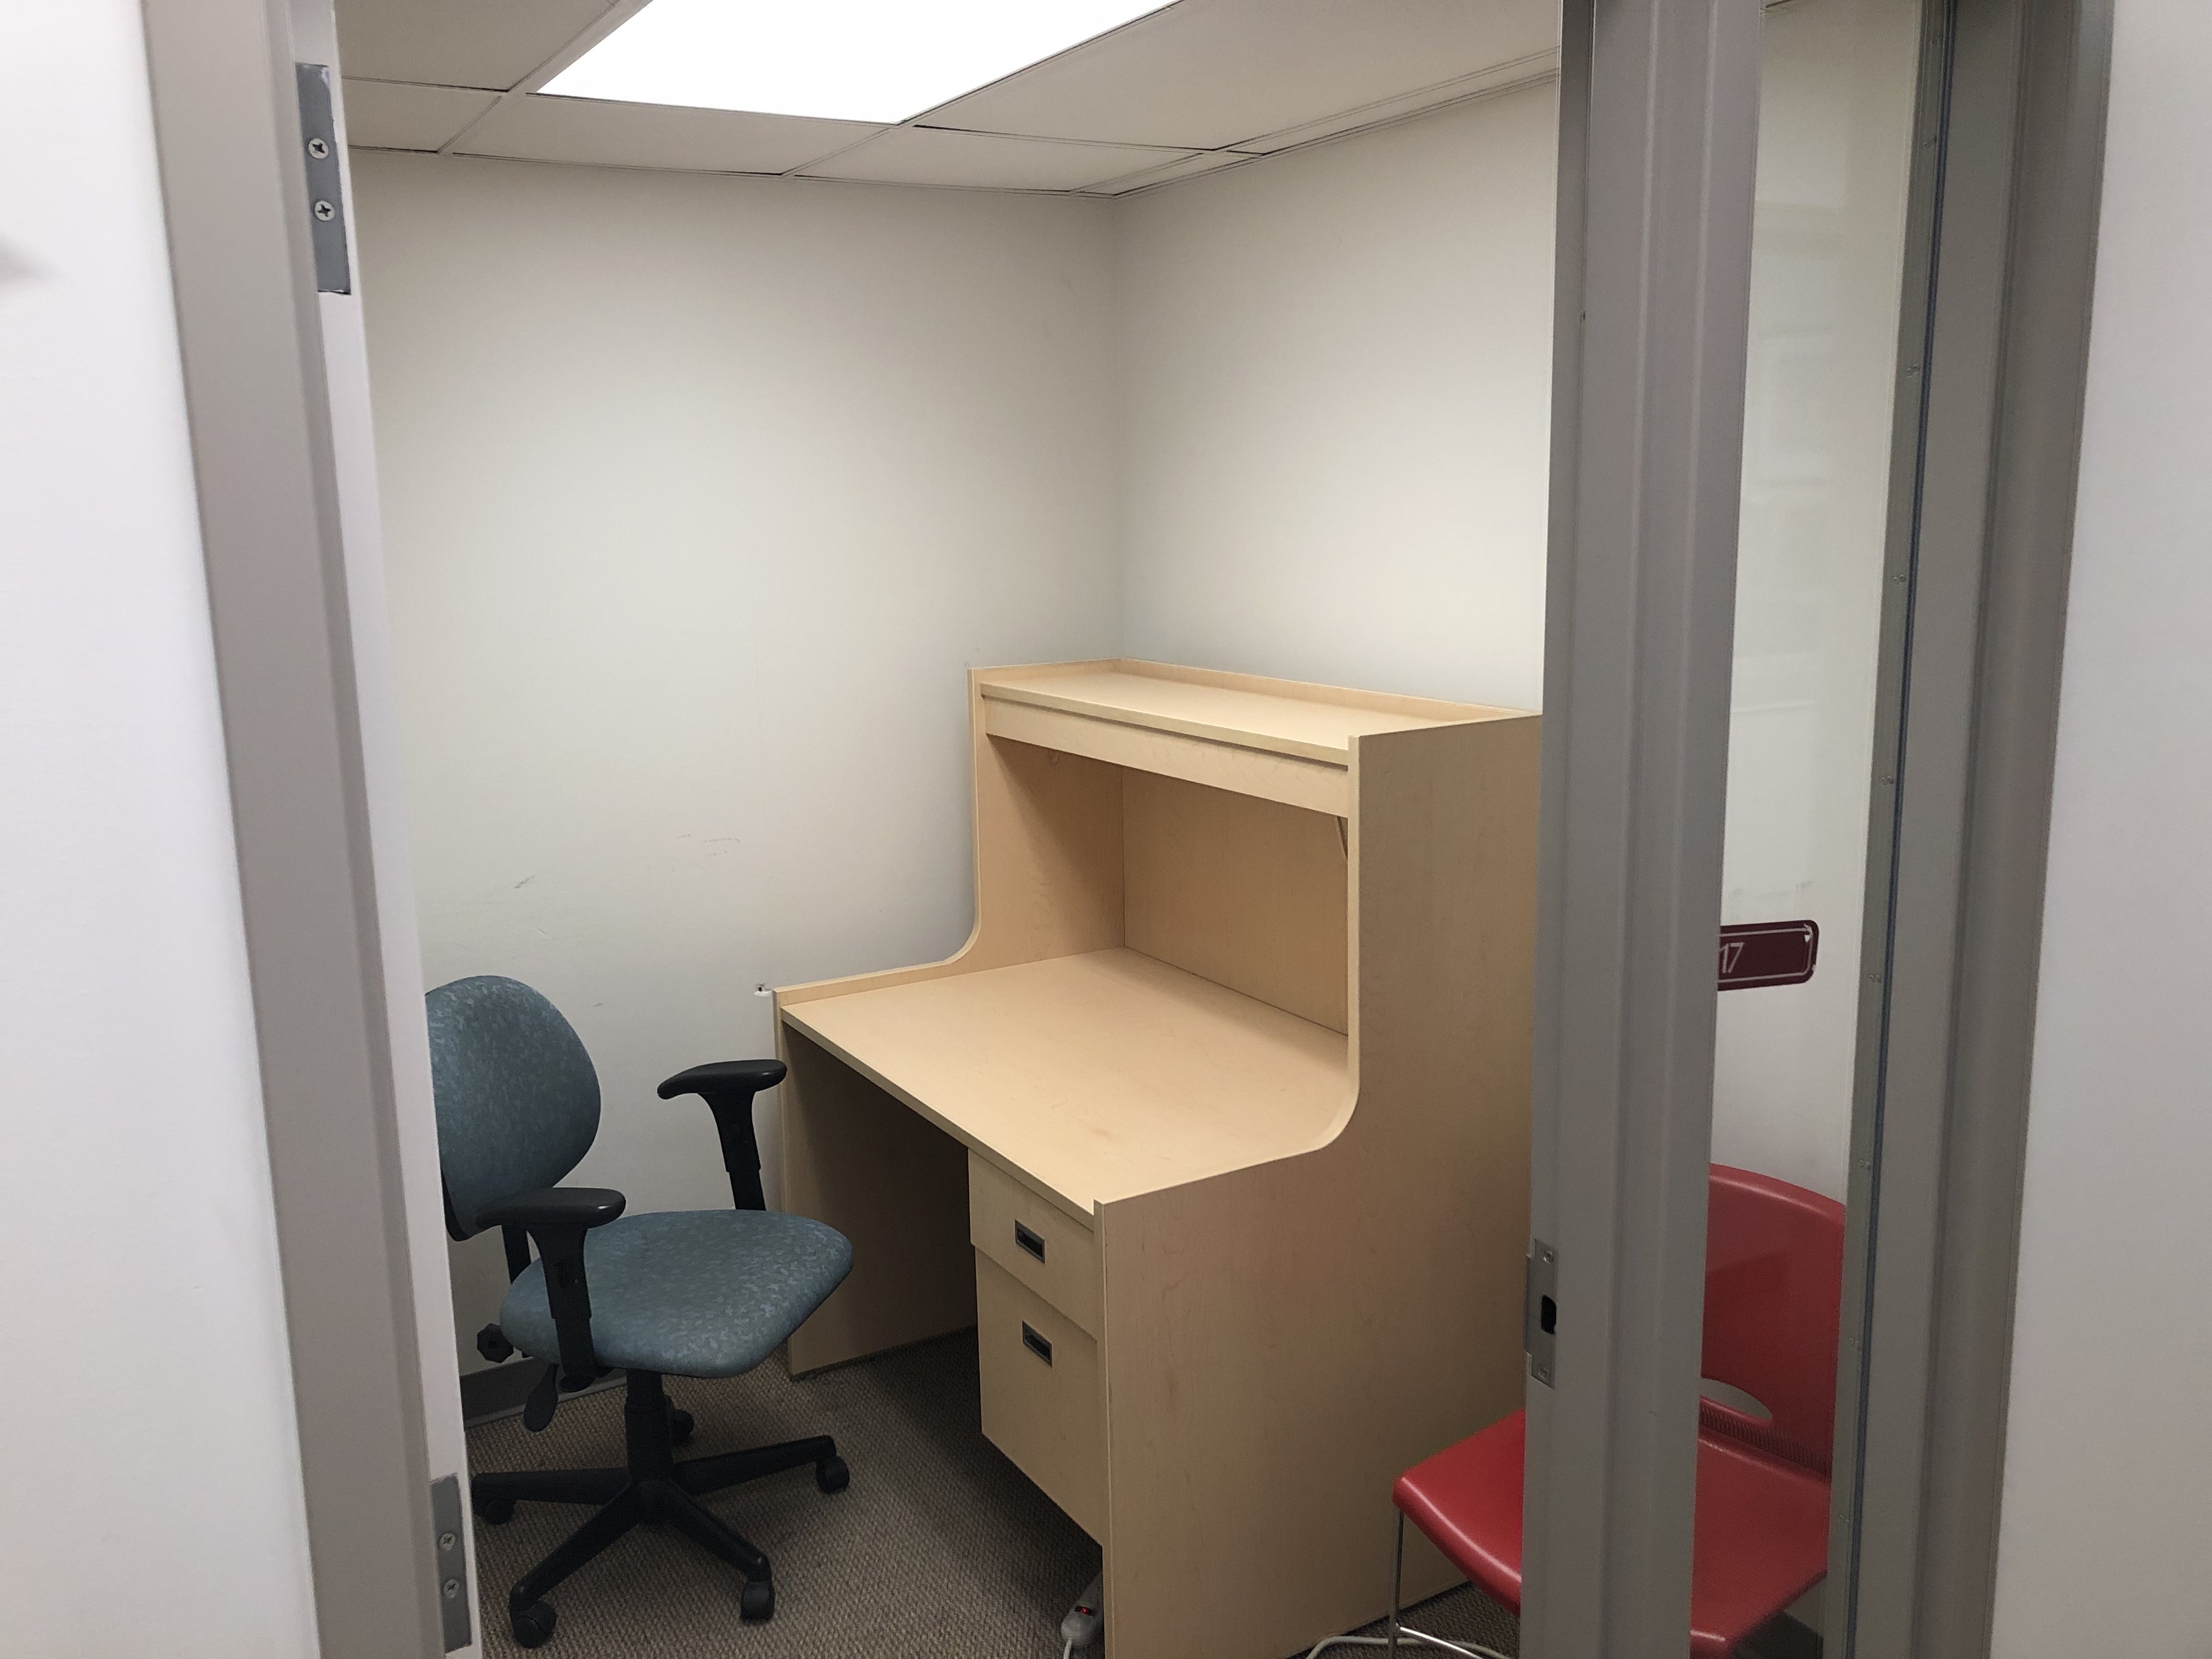 A private study room with a chair and desk.  The desk has draws. There is a tall, narrow window next to door. Rooms will vary slightly.